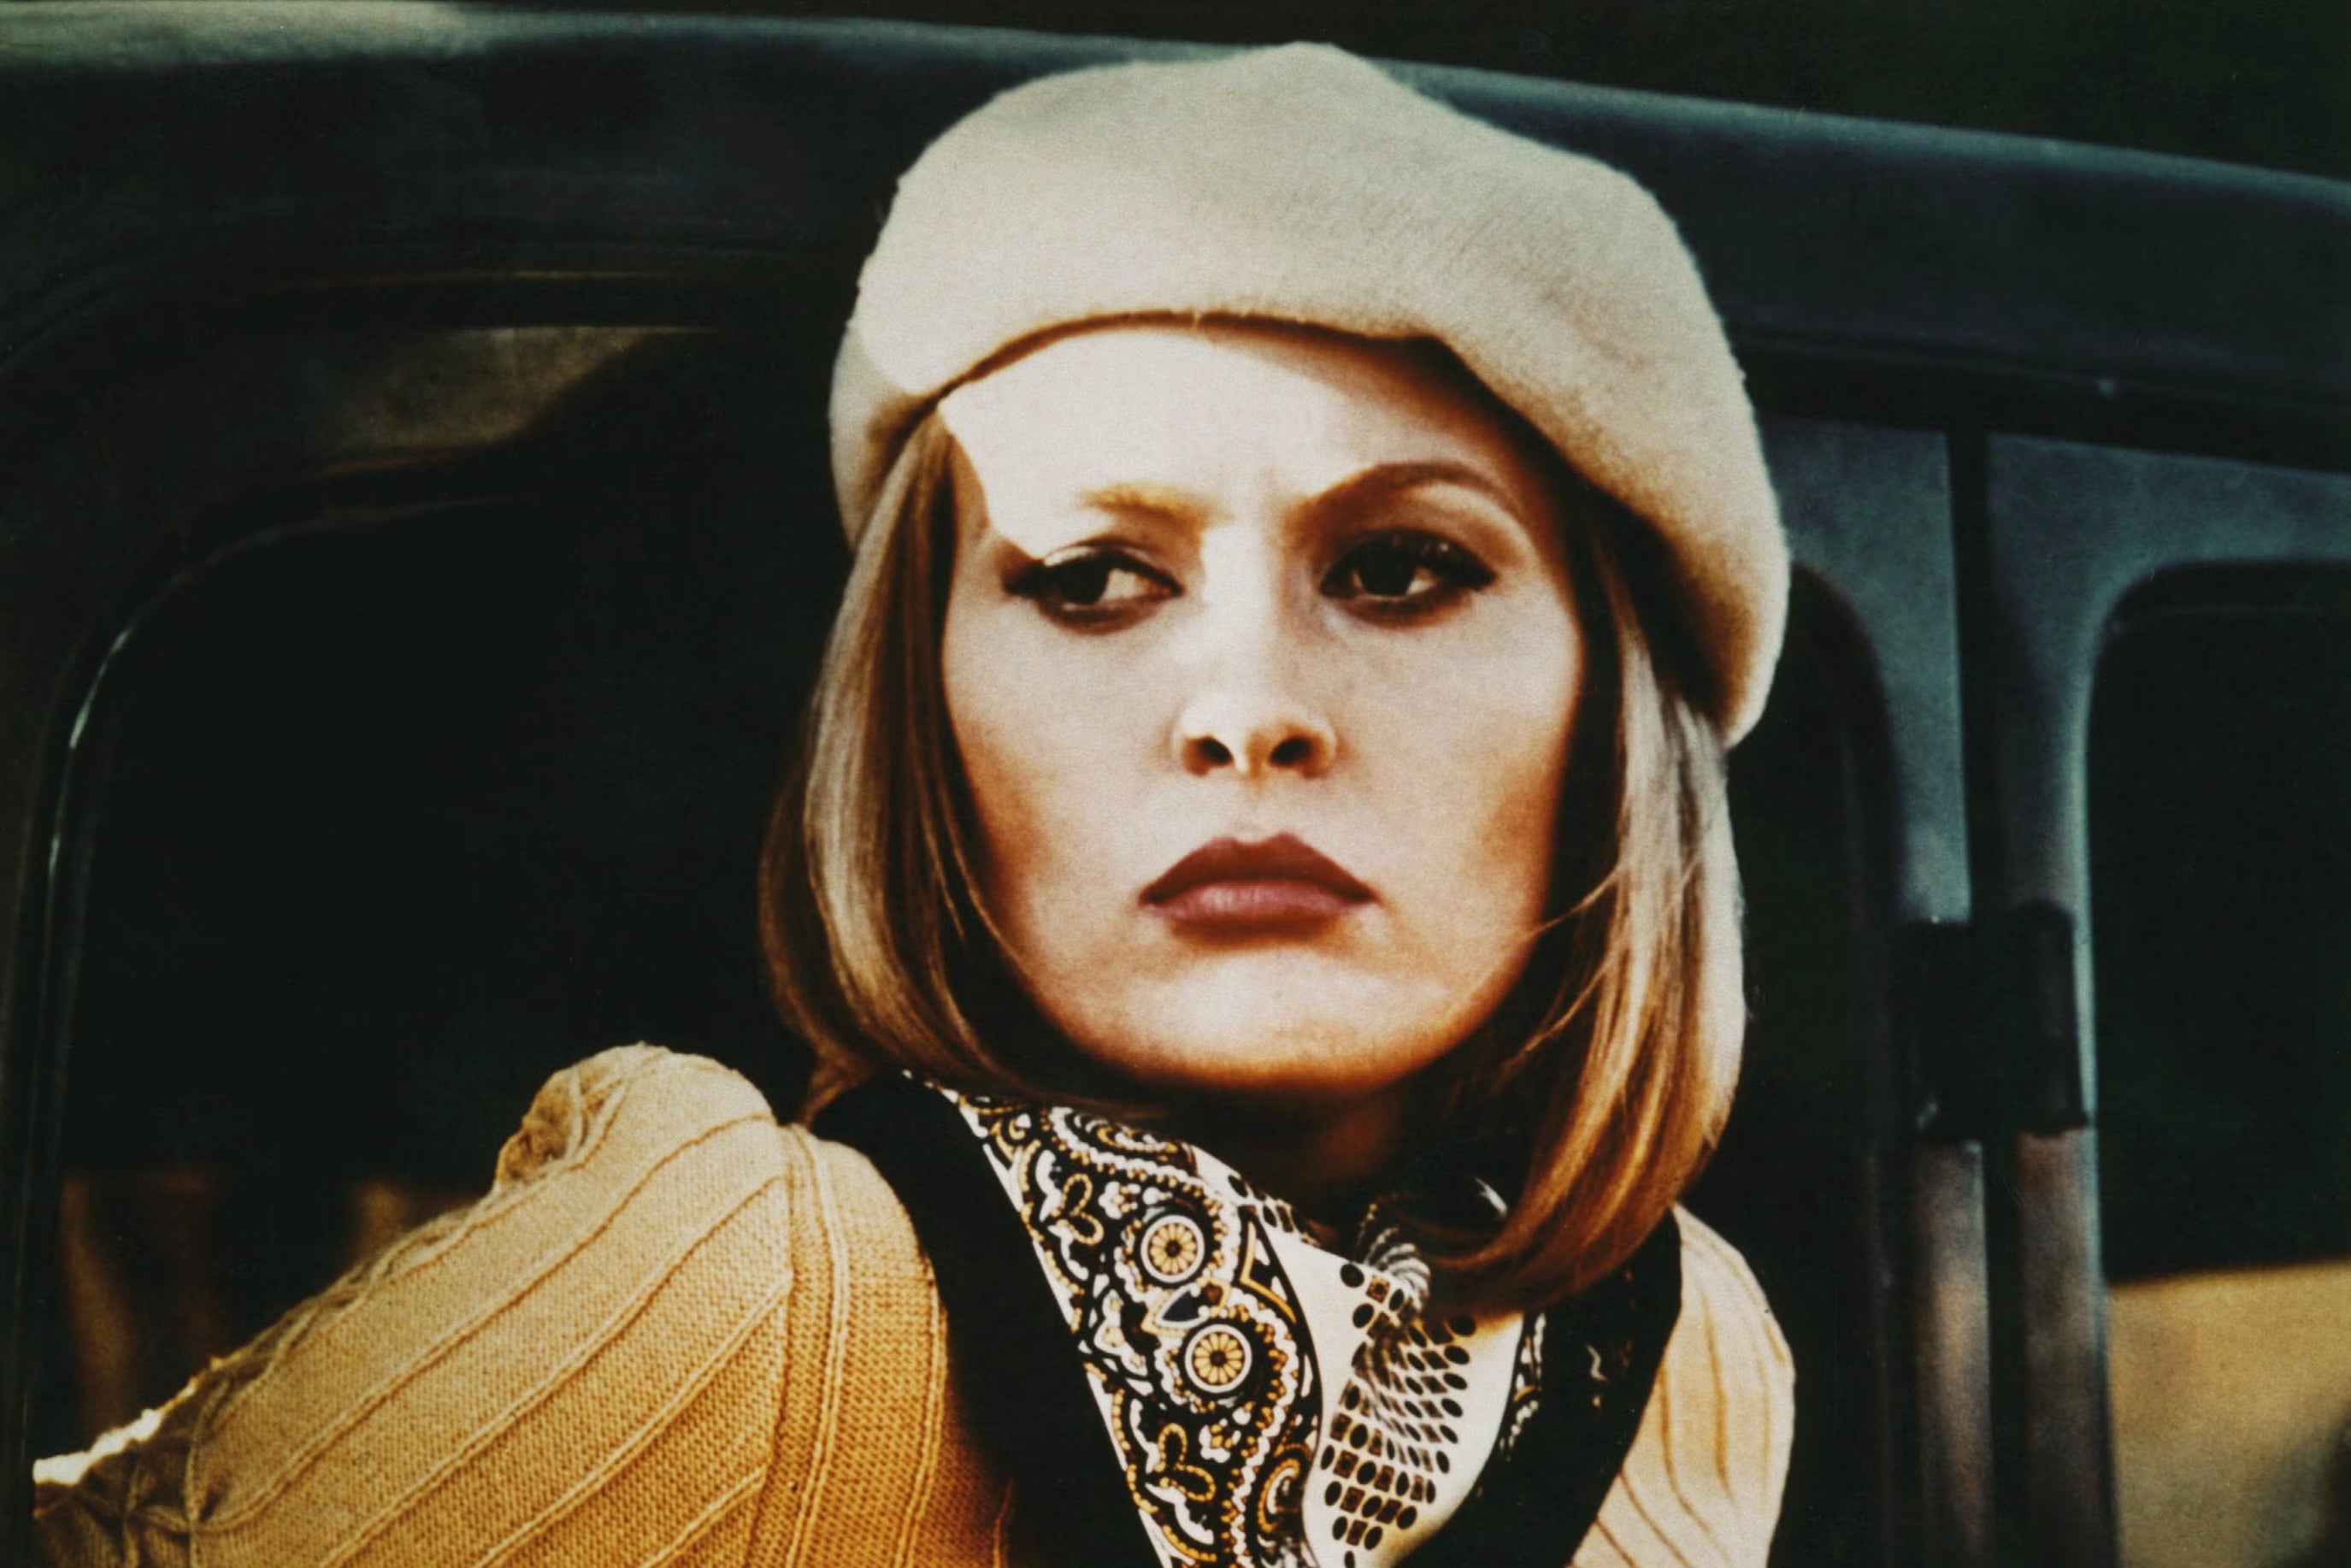 Dunaway as Bonnie Parker, the role that made her famous around the world